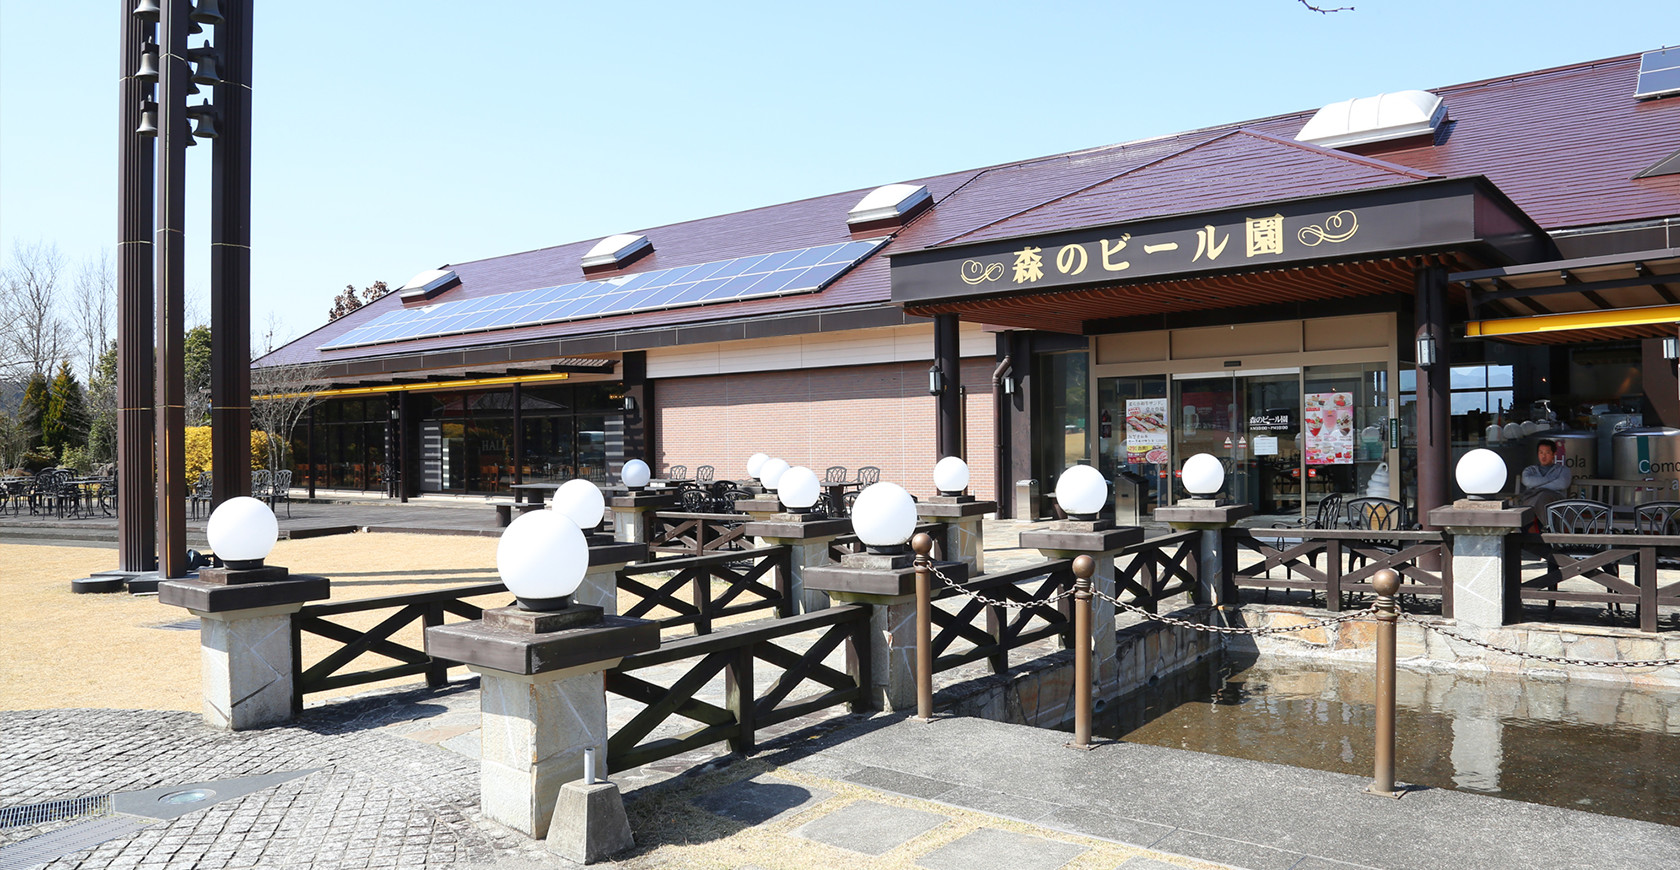 Sapporo Beer Kyushu Hita Factory Enjoy Dishes that Pair with Beer at "Forest Beer Garden"